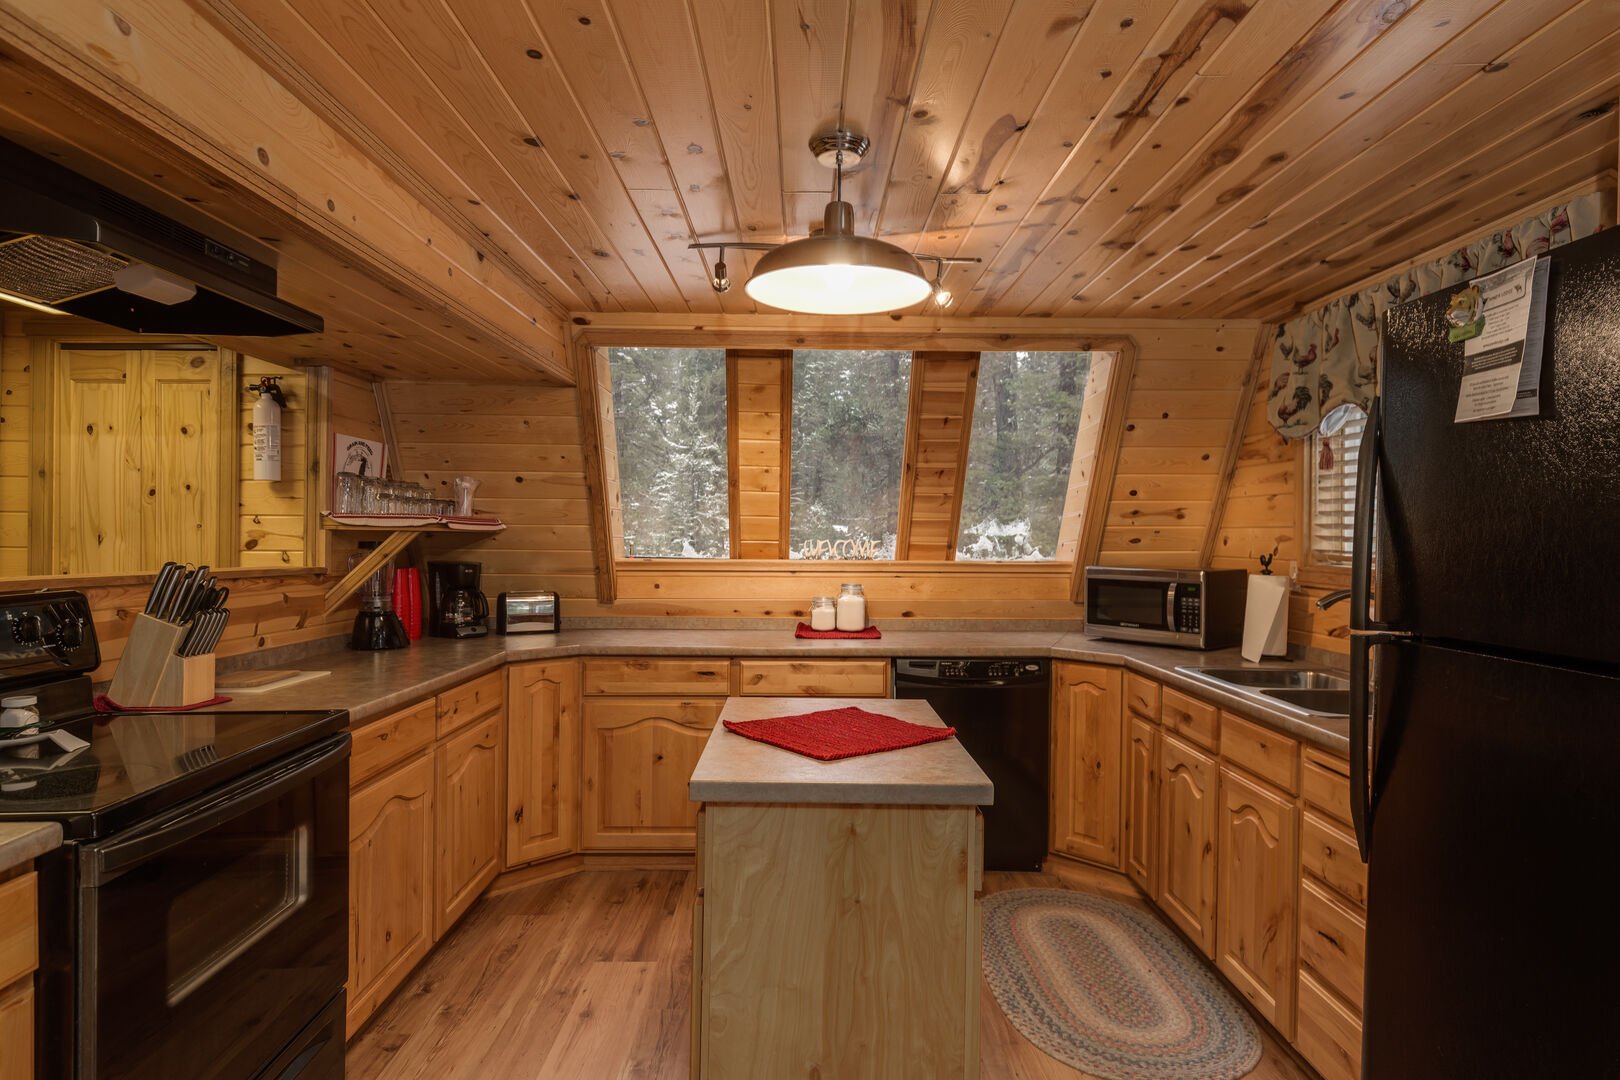 Roger Dodger ~ MAIN CABIN (TWO CABINS ON PROPERTY: MAIN CABIN AVAILABLE YEAR-ROUND AND SLEEPS 6 PEOPLE. ACCOMODATIONS ABOVE GARAGE AVAILABLE IN SUMMER ONLY AND SLEEPS ADDITIONAL 5 PEOPLE.)